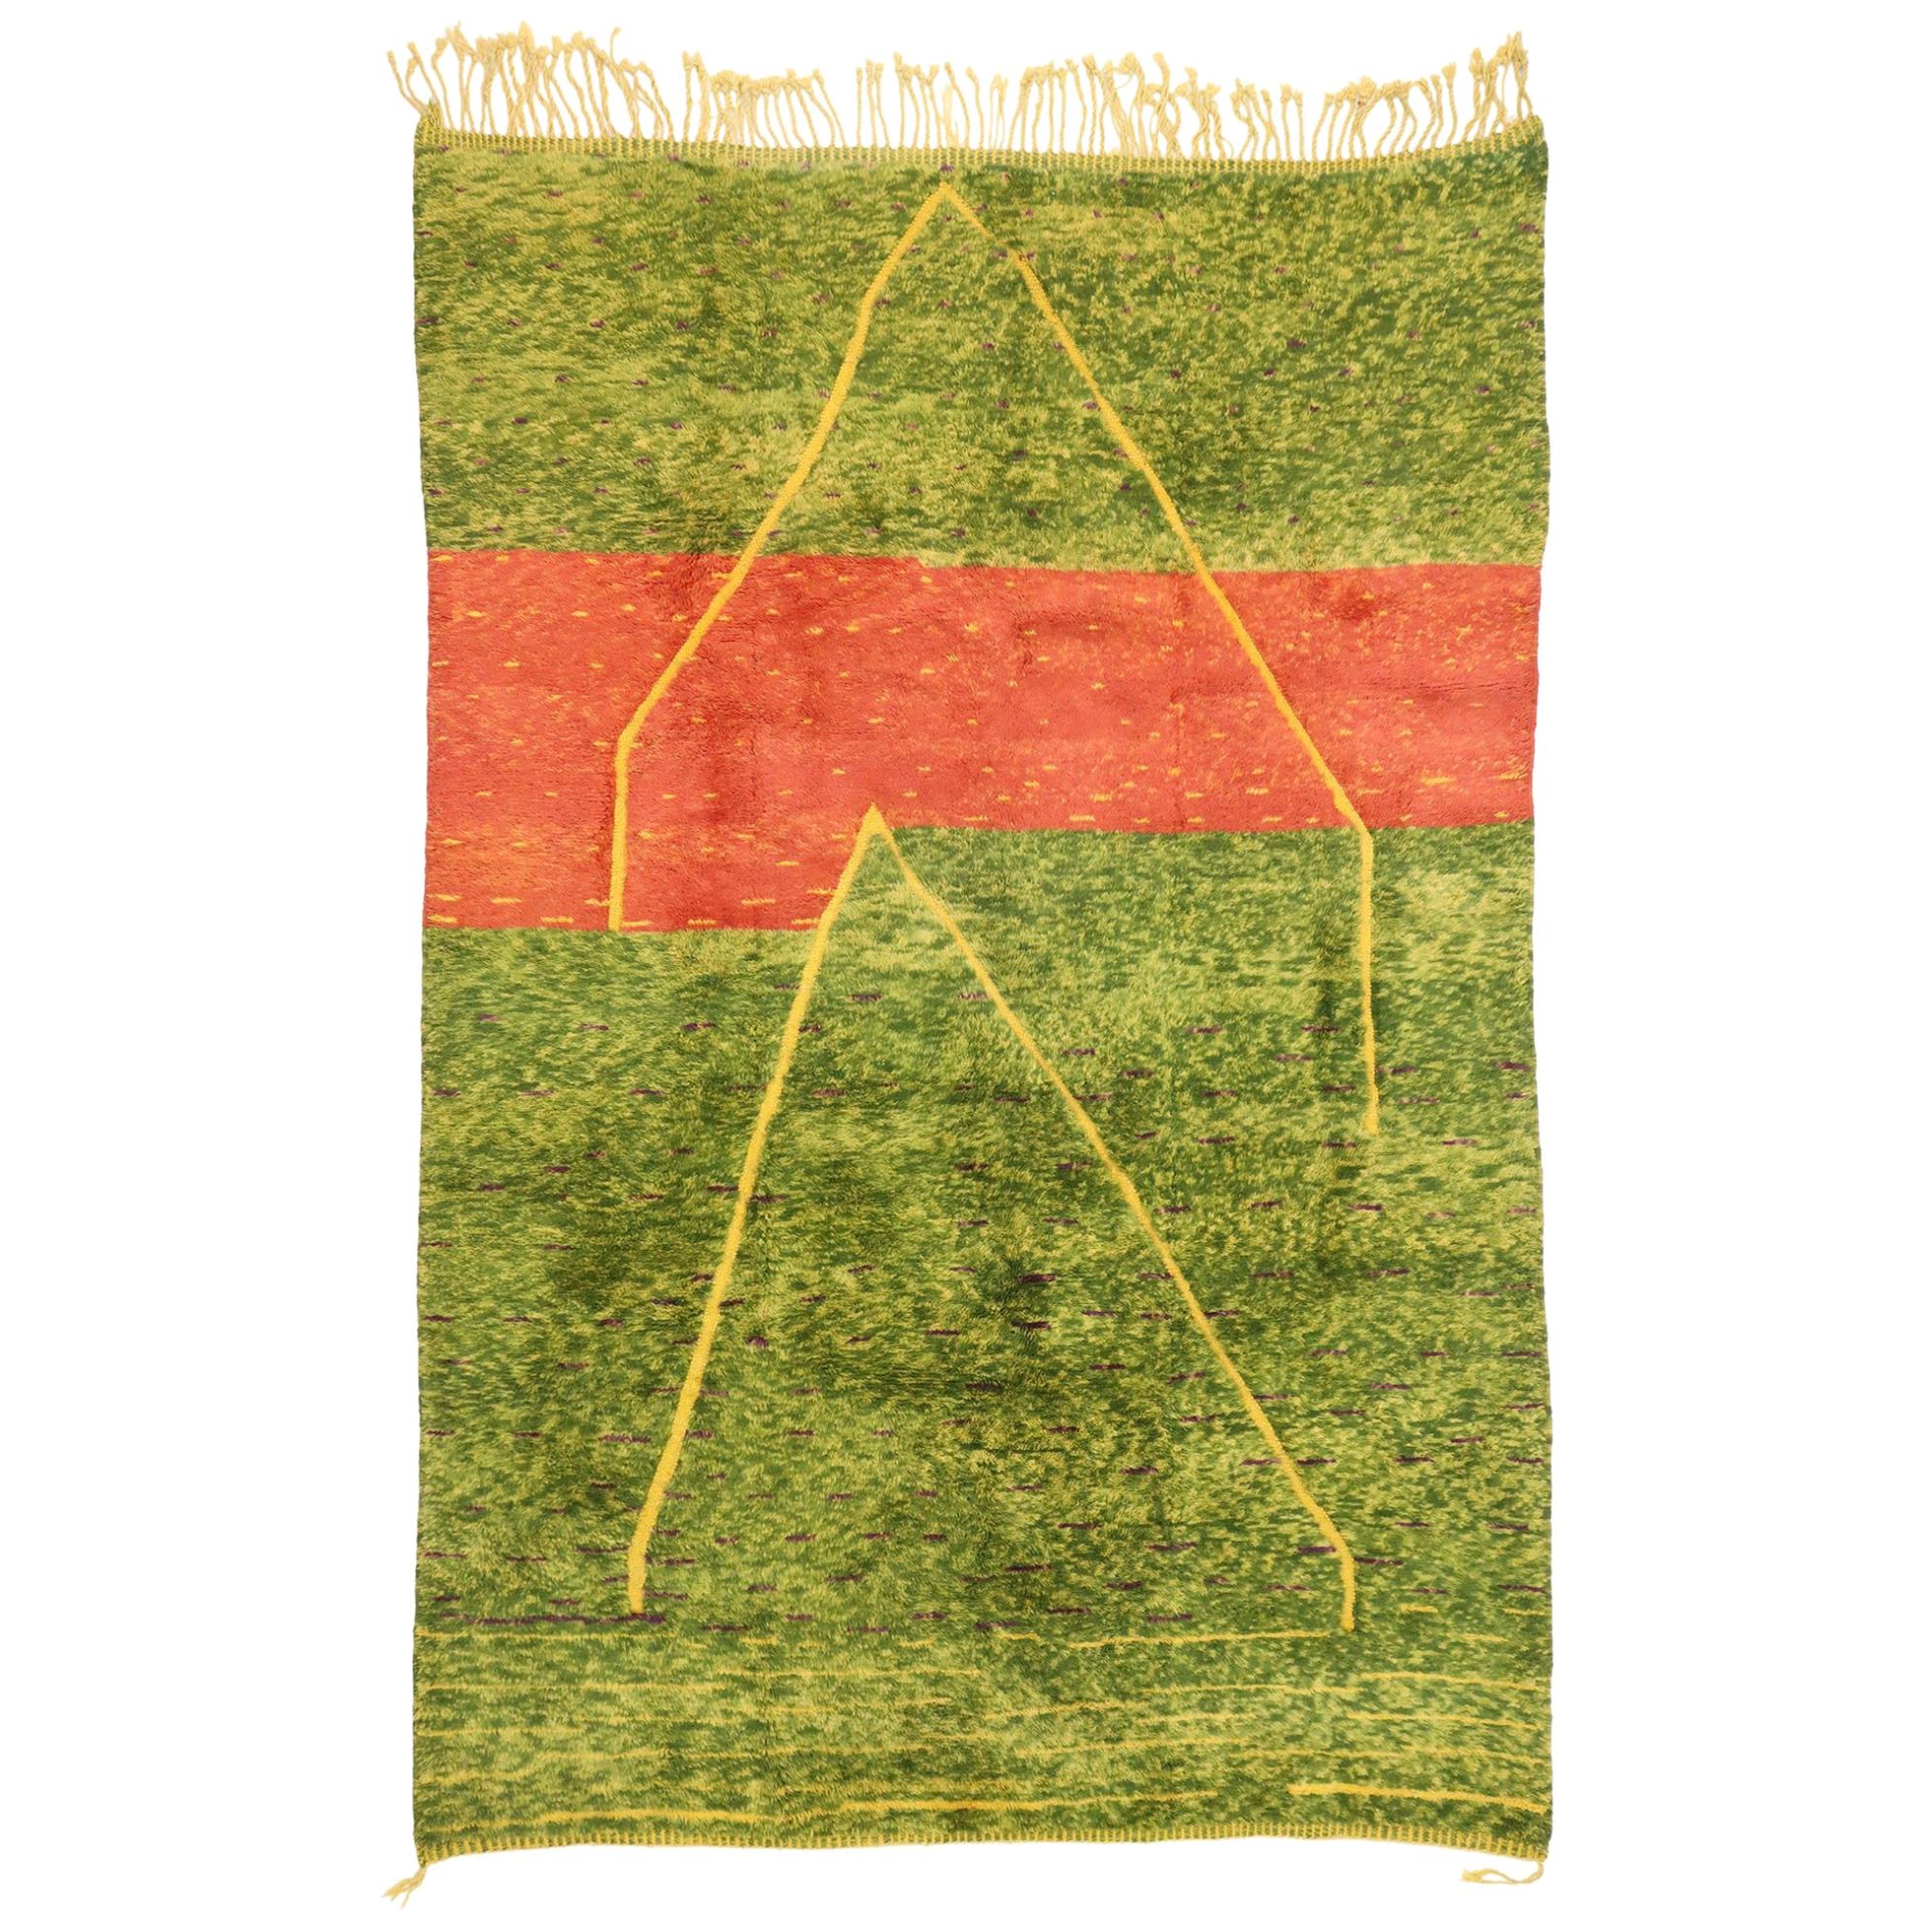 Green Beni Mrirt Moroccan Rug, Tribal Enchantment Meets Abstract Expressionism